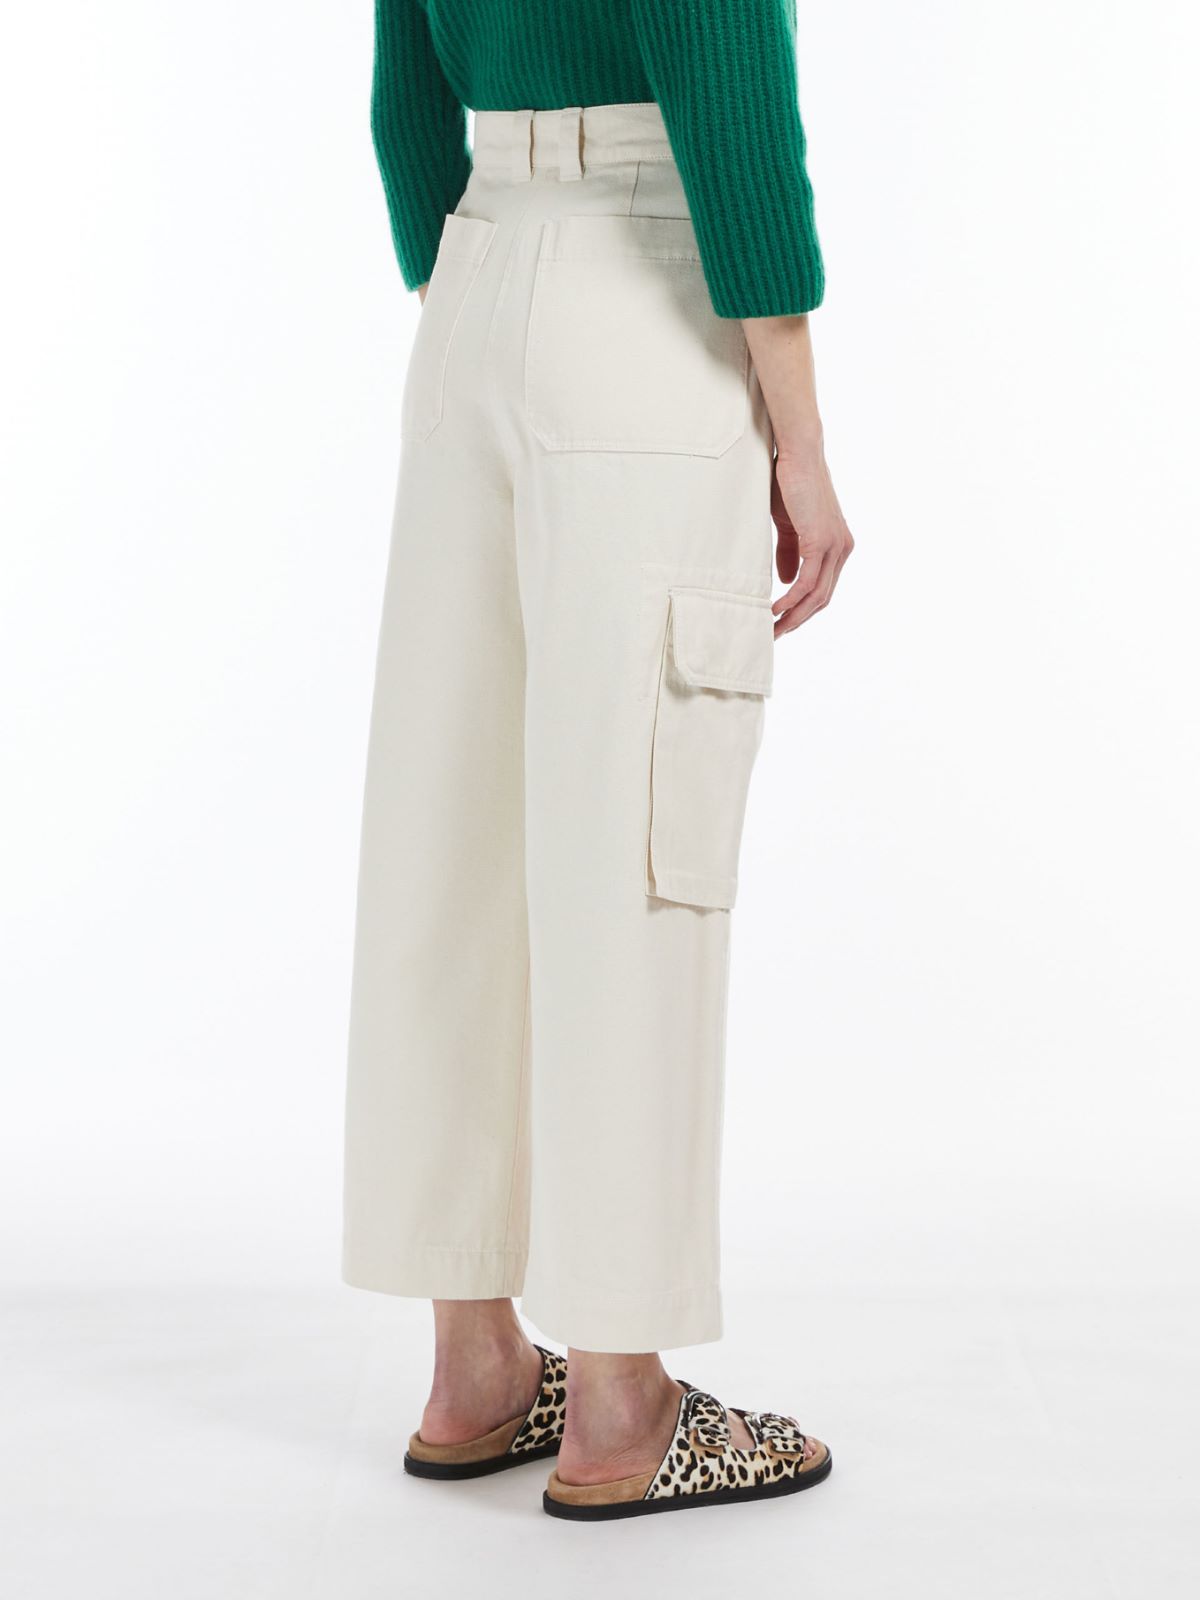 Cotton trousers - IVORY - Weekend Max Mara - 3